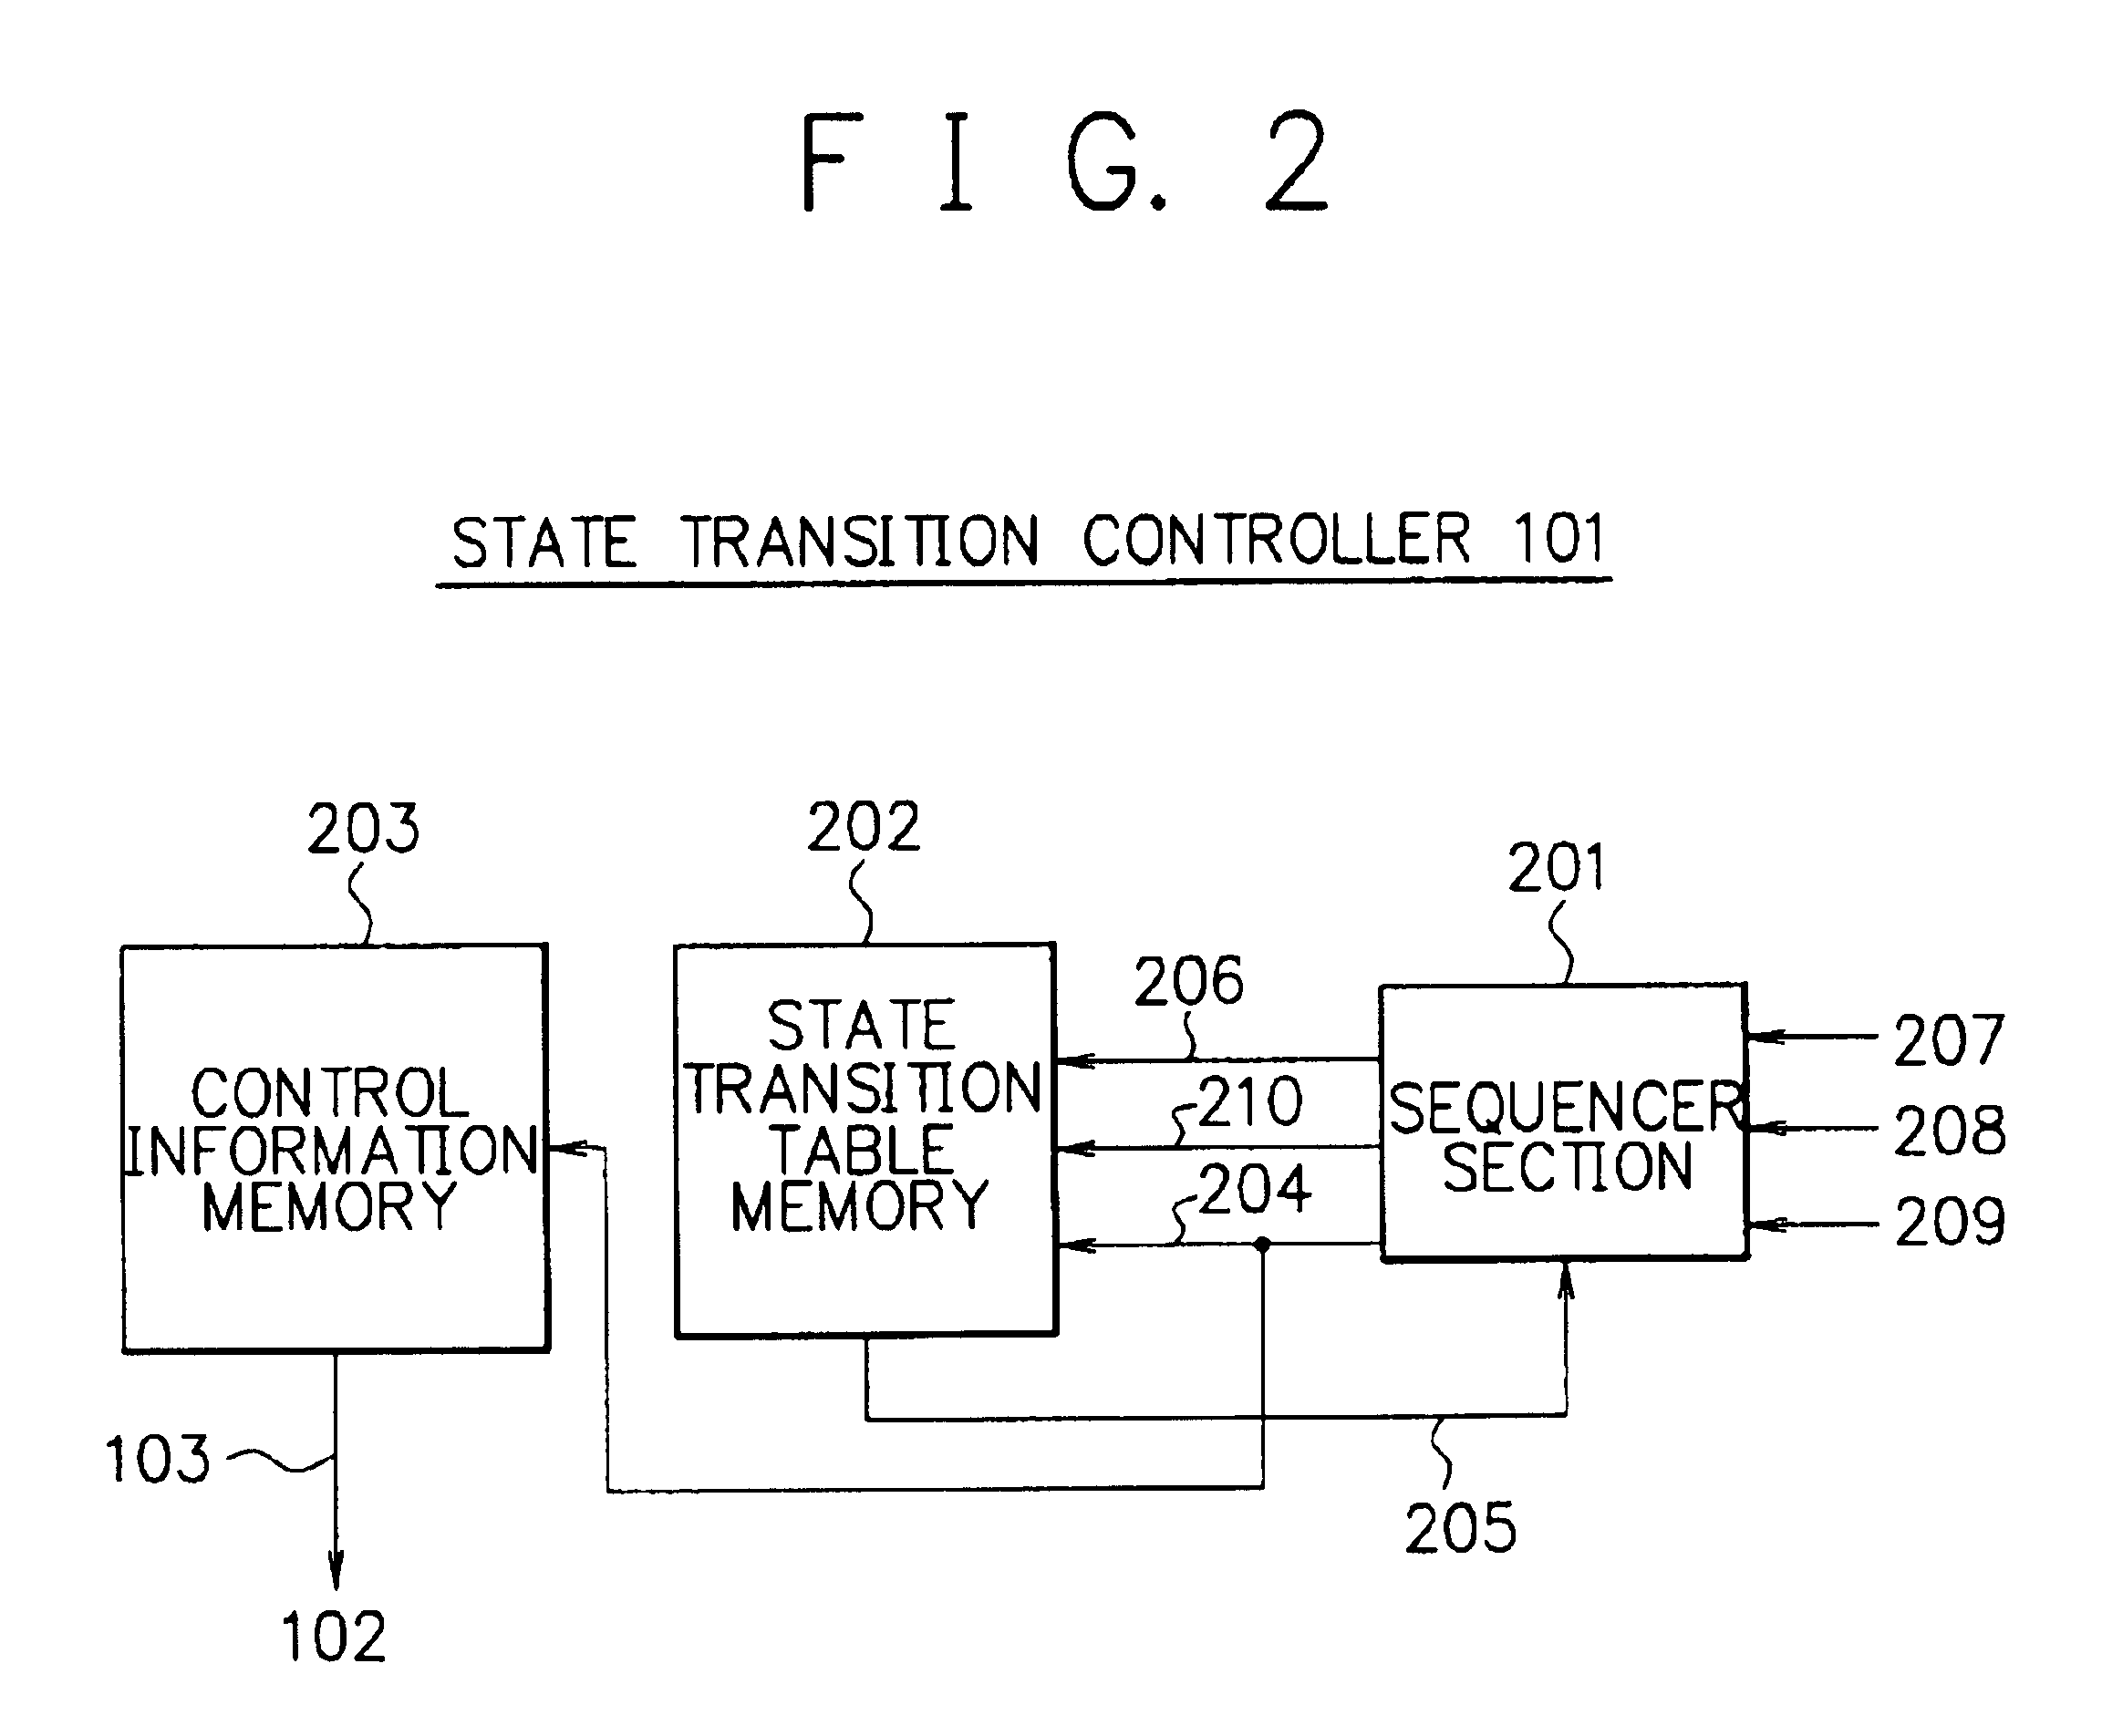 Array type processor with state transition controller identifying switch configuration and processing element instruction address